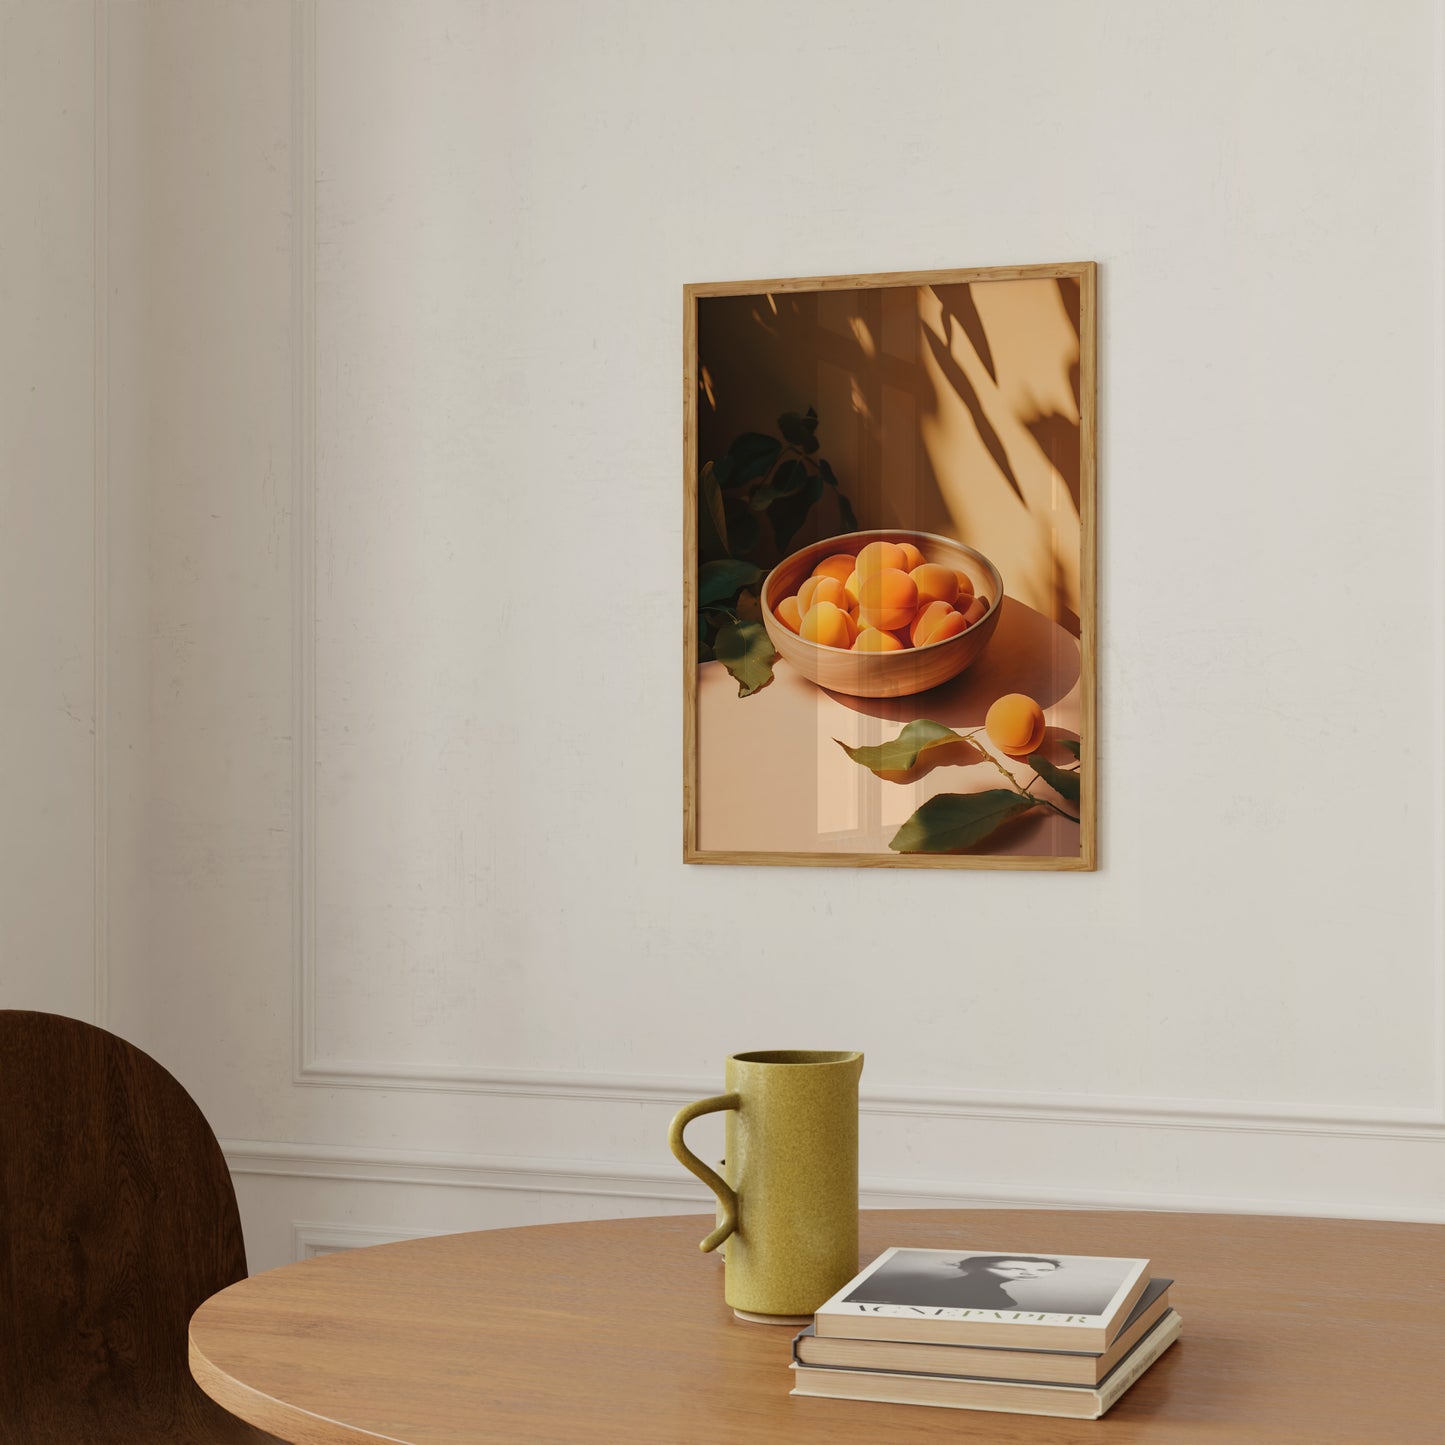 A framed painting of a bowl of oranges on a wall above a table with a mug and books.